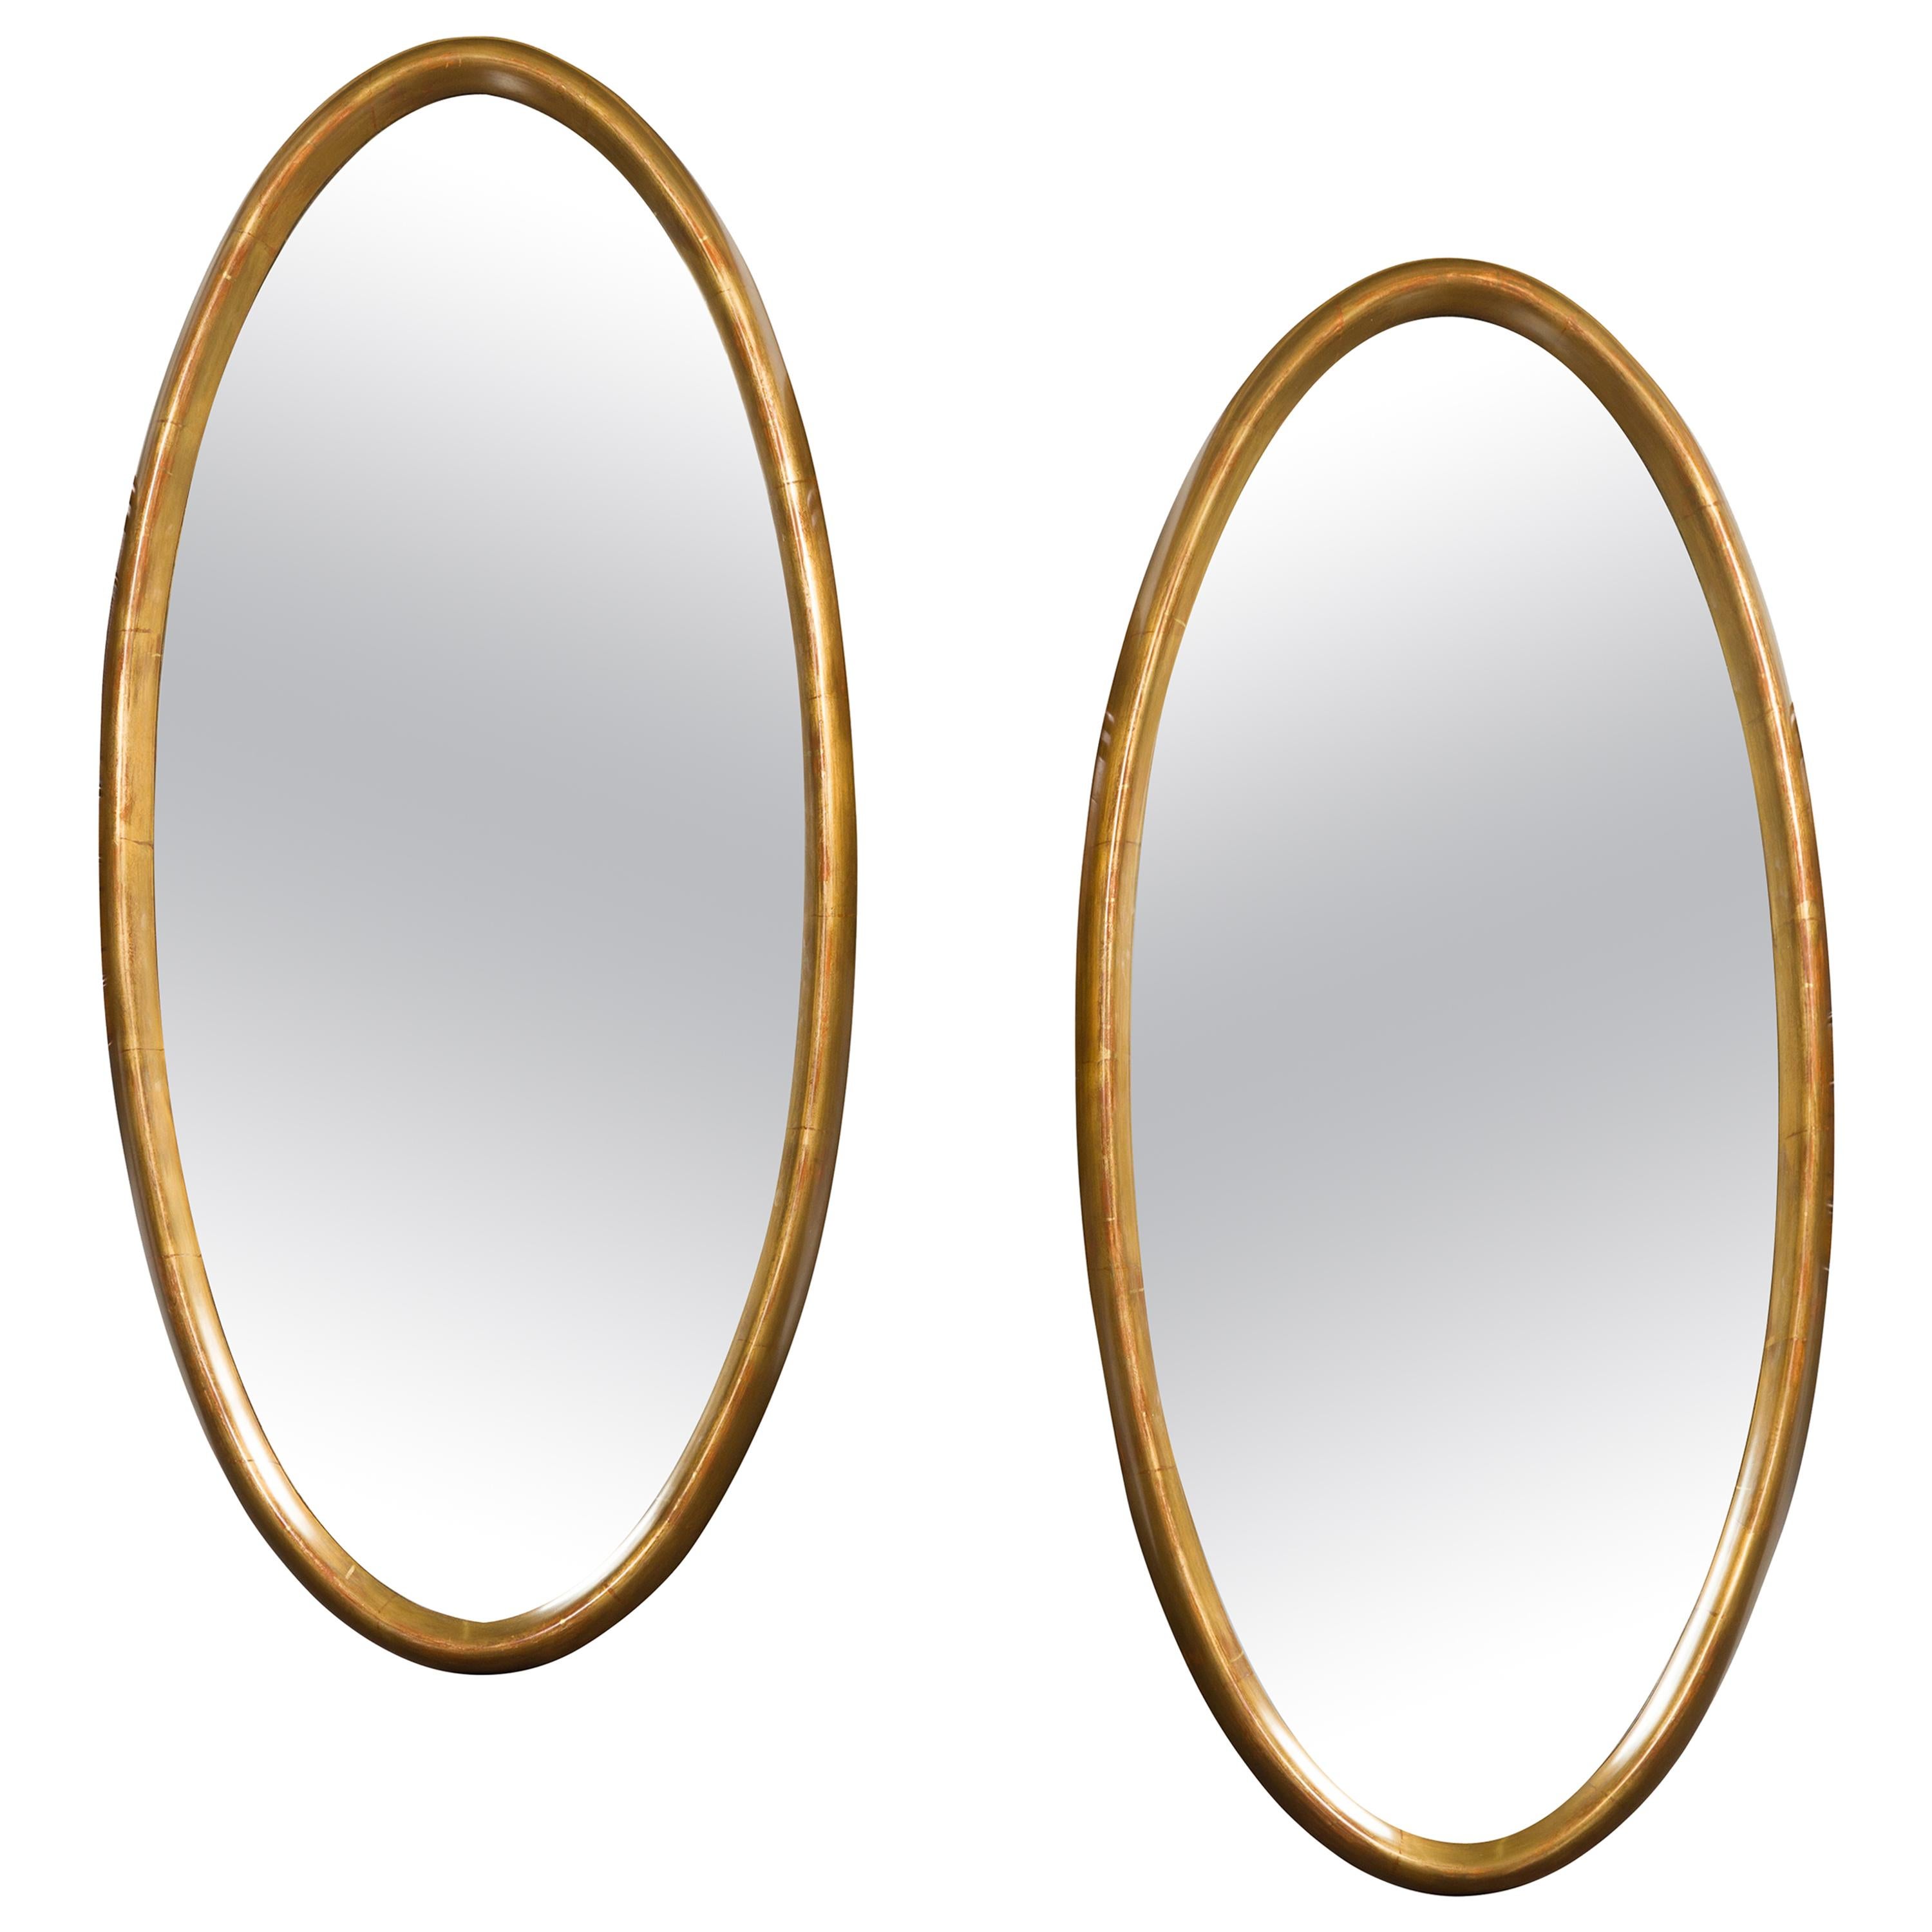 Pair of Vintage Italian Midcentury Tall Giltwood Oval Mirrors with Clean Lines For Sale